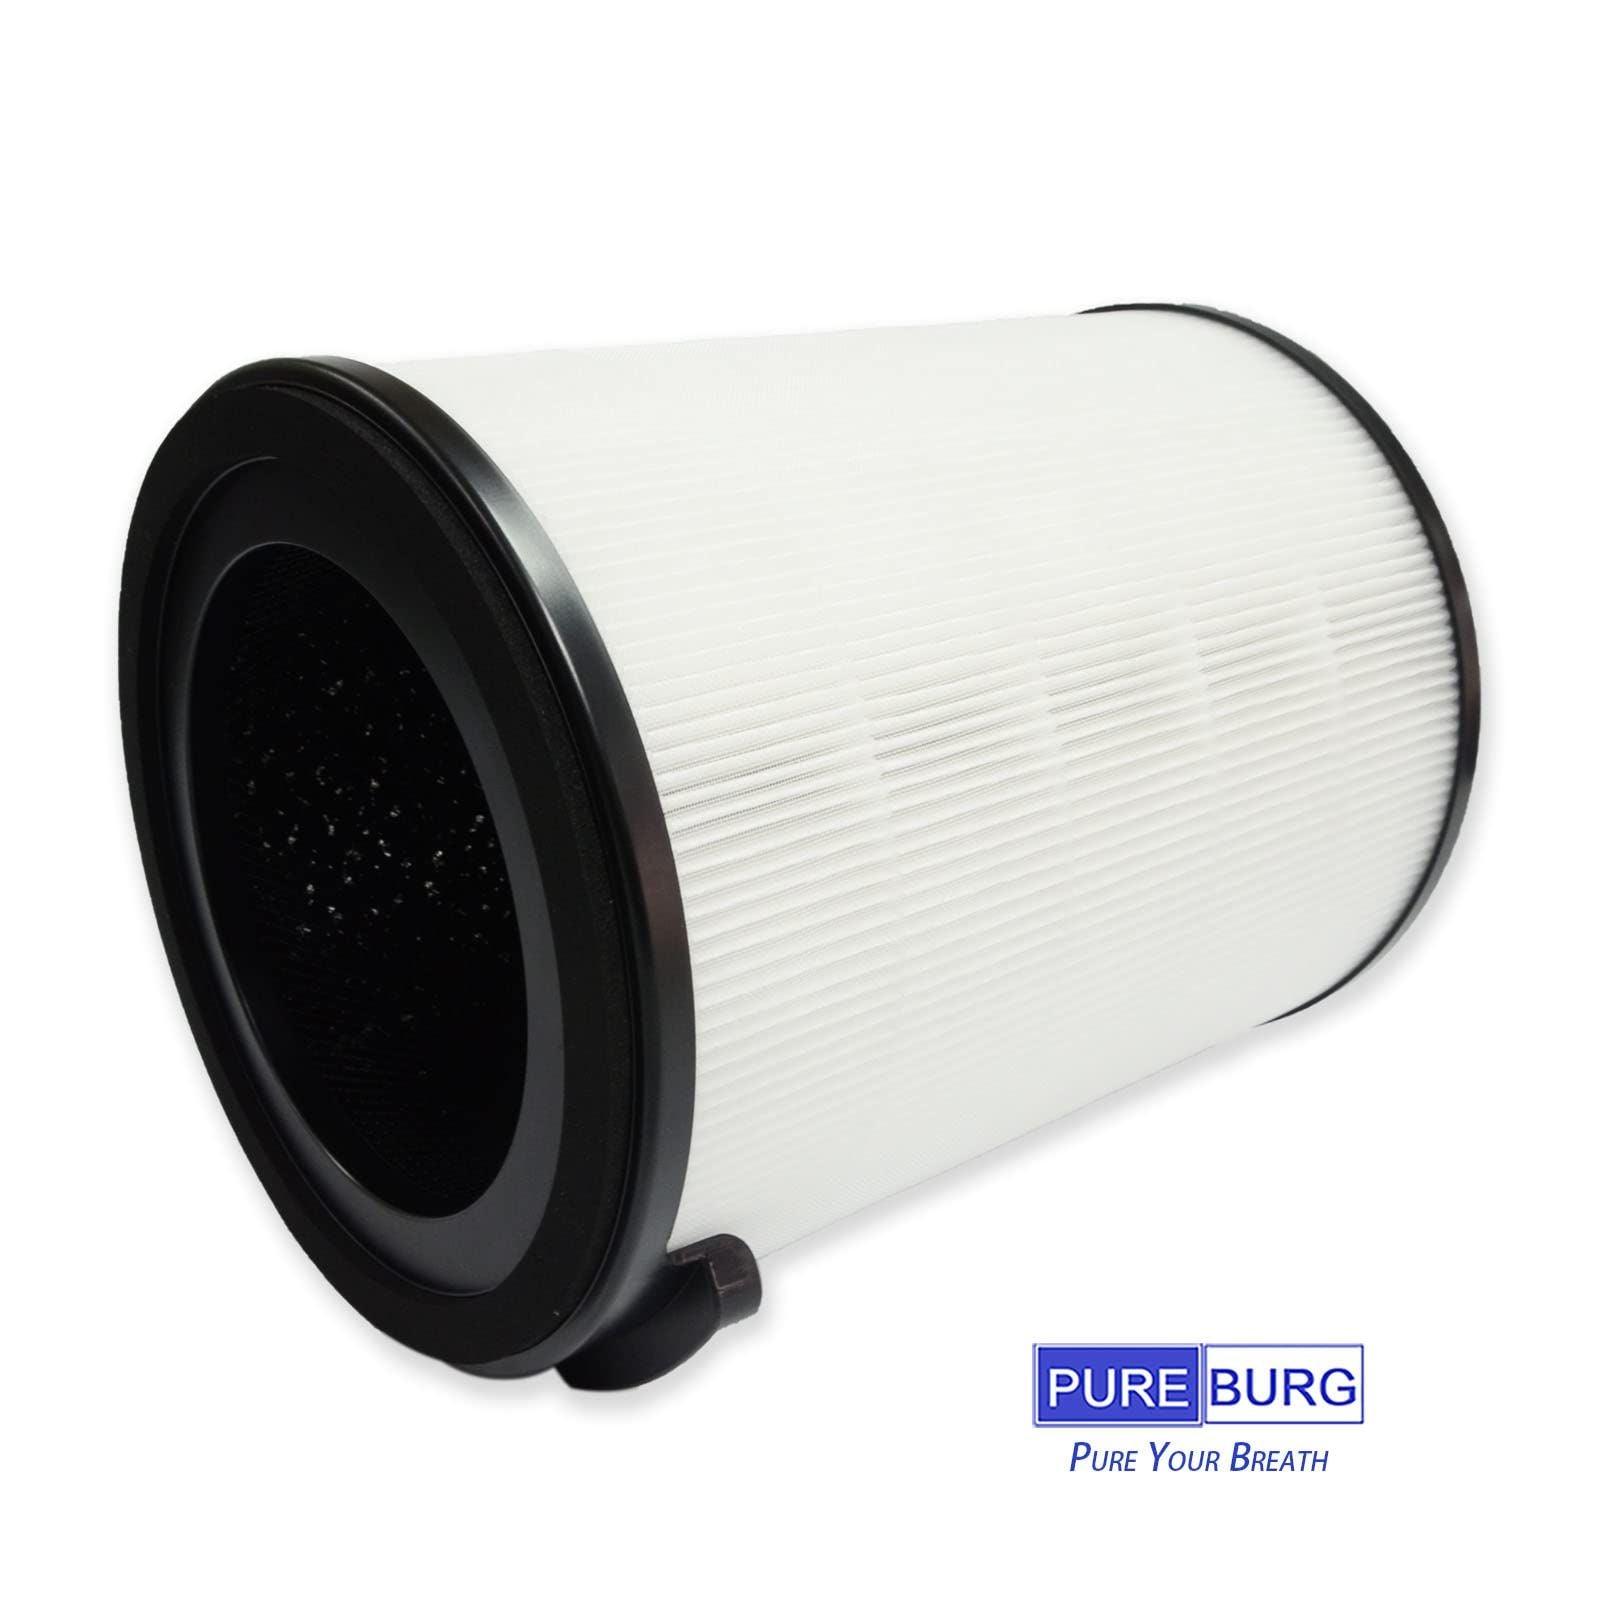 PUREBURG Replacement HEPA Filter Compatible with PHILIPS 2000i Series Air Purifier AC2936/33, Part Number FY2180/30 1